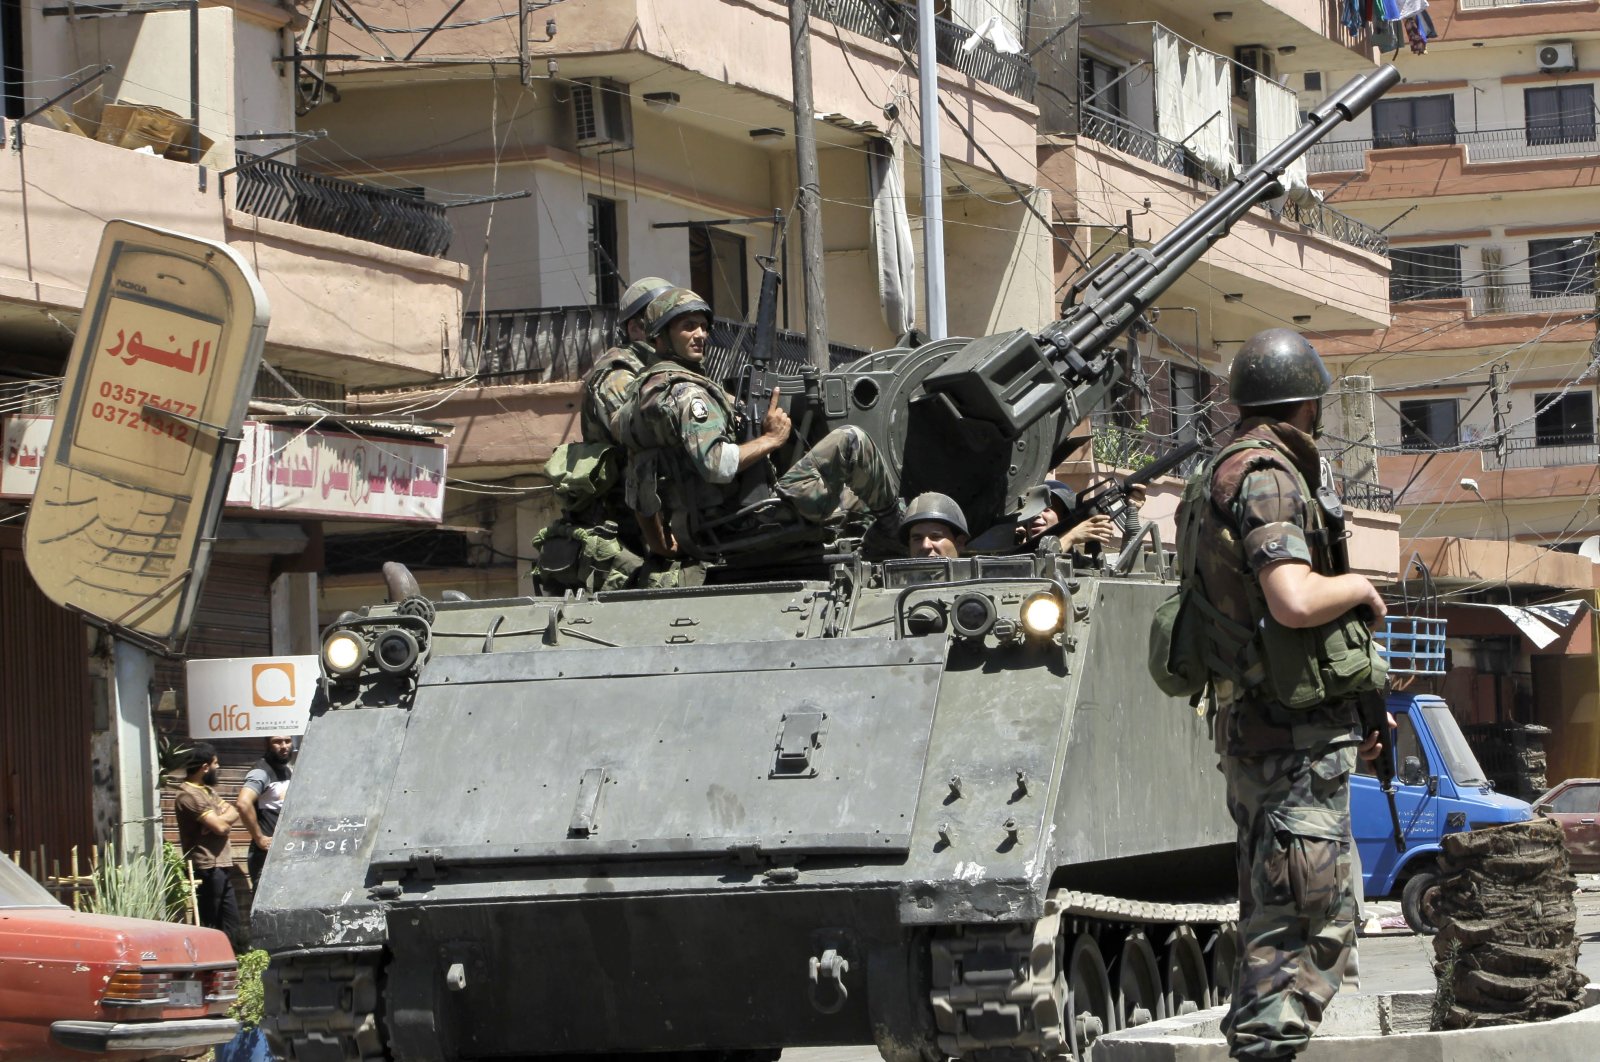 Lebanese army soldiers patrol after days of clashes between pro and anti-Syrian regime groups, in the northern city of Tripoli, Lebanon, Aug. 23, 2012. (AP Photo)